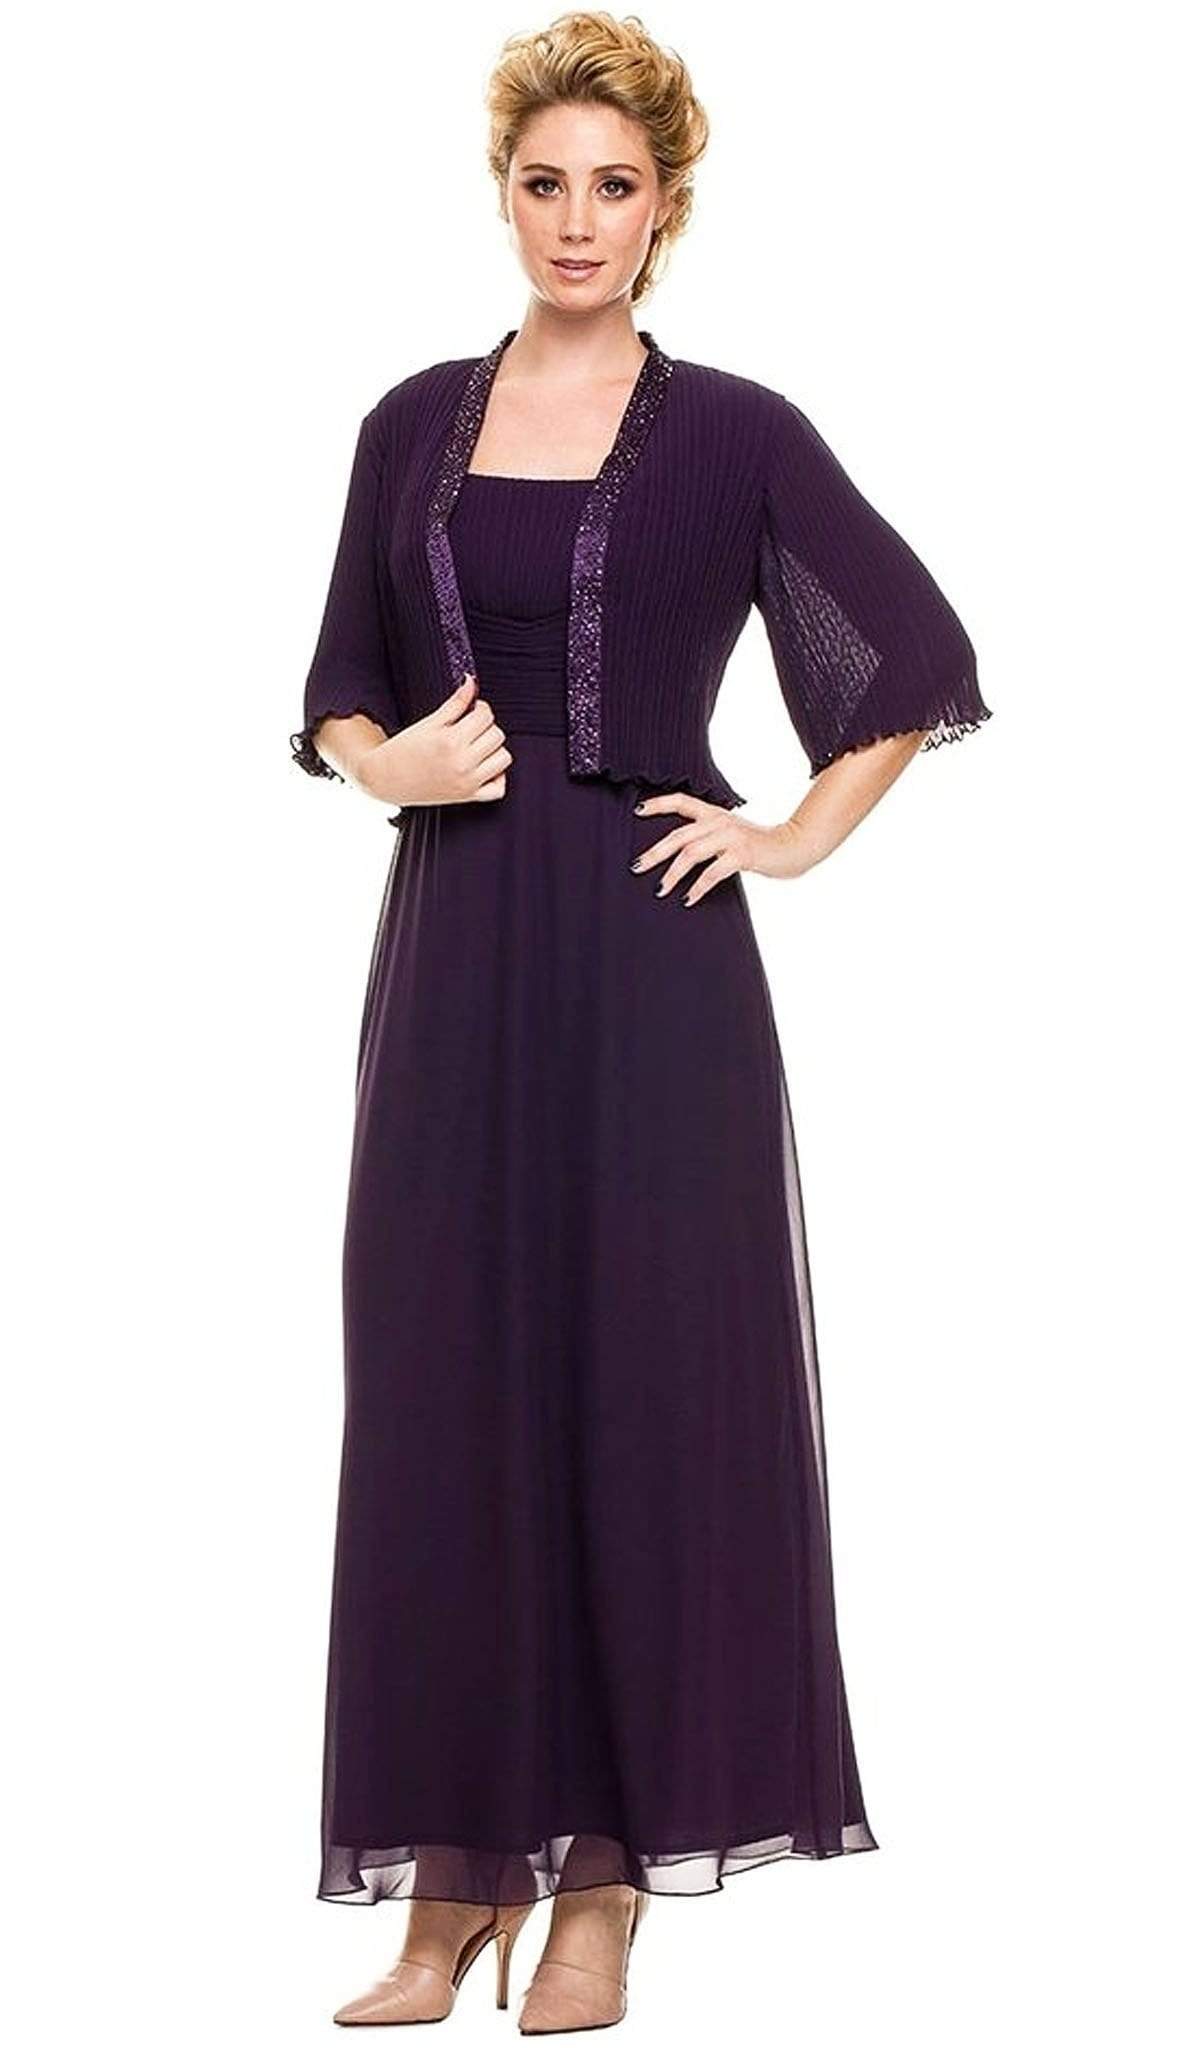 Nox Anabel - 5099 Ruched Square Neck Dress with Matching Jacket Mother of the Bride Dresses M / Plum